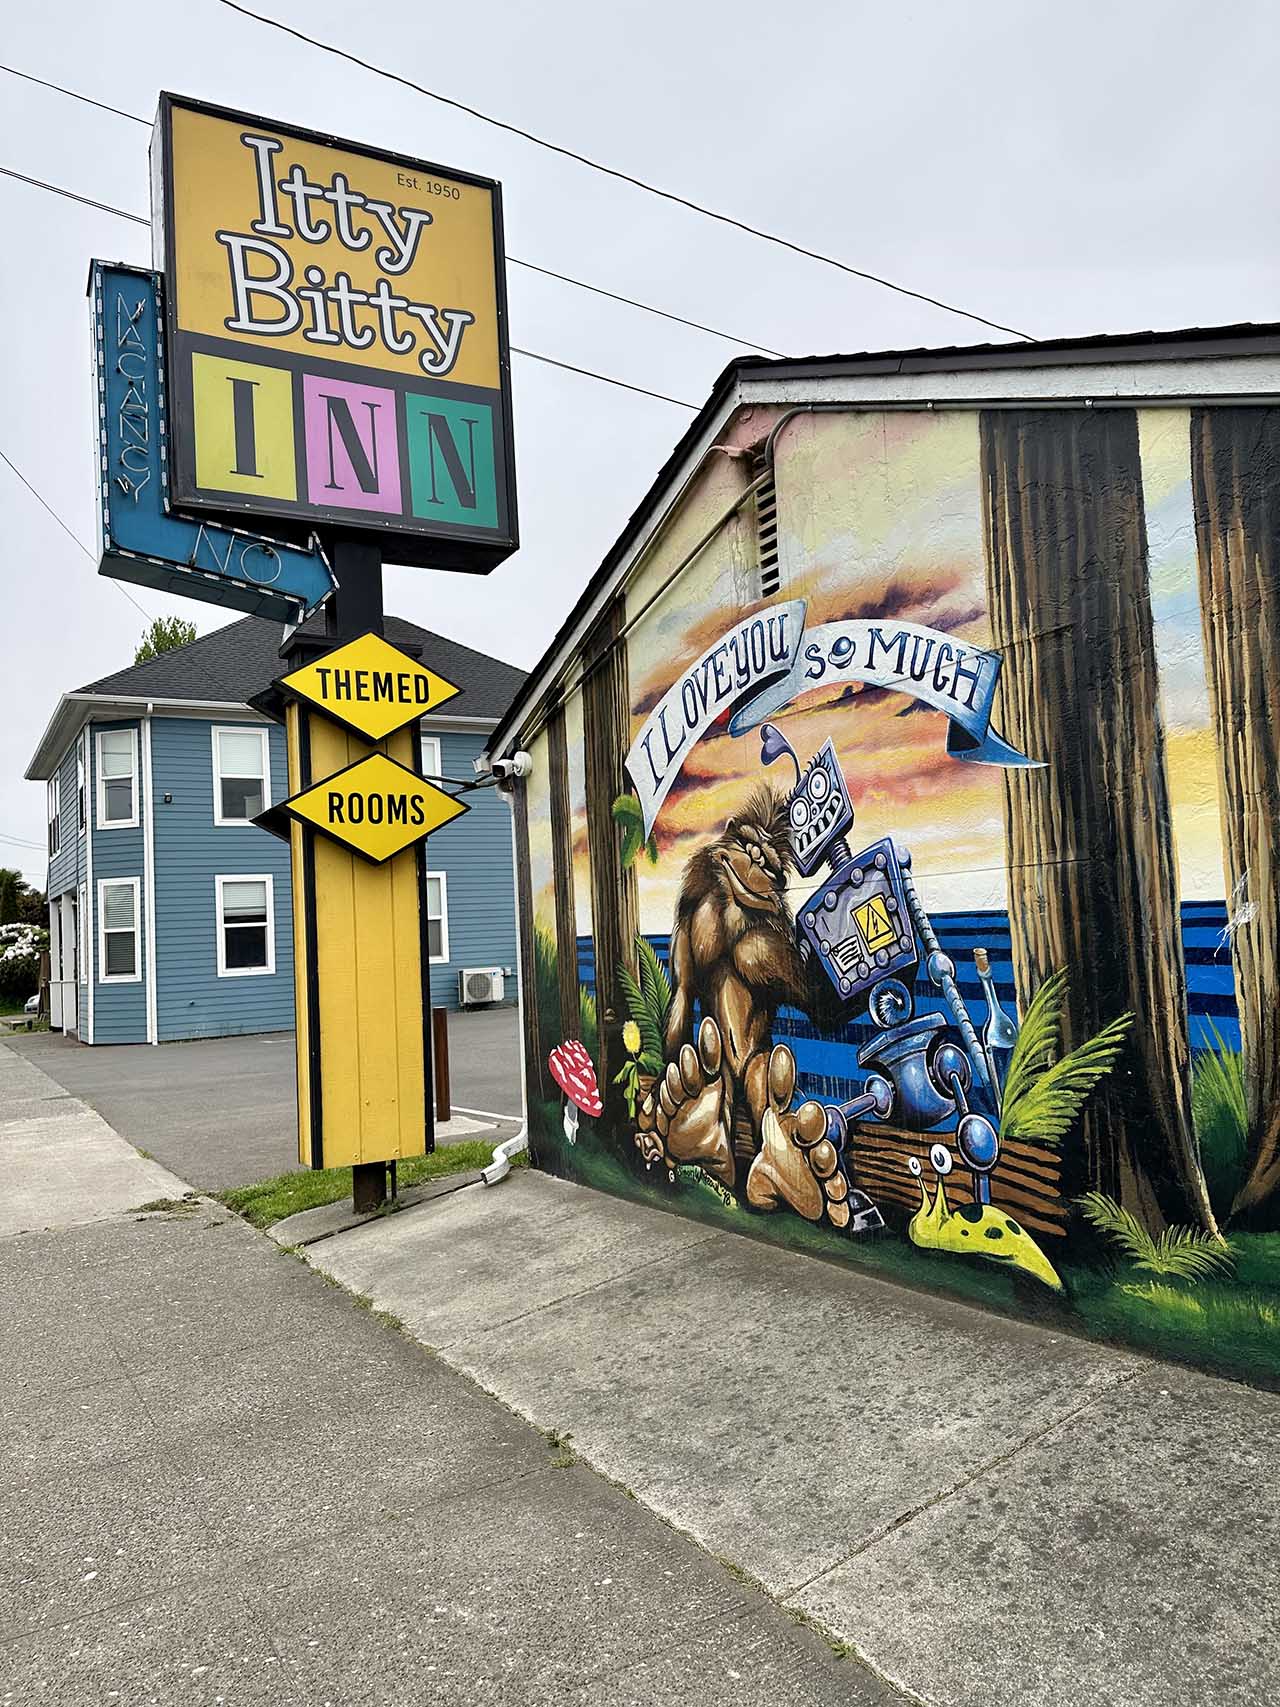 Highway-Sign-and-Mural-Itty-Bitty-Inn-North-Bend-Oregon.jpeg